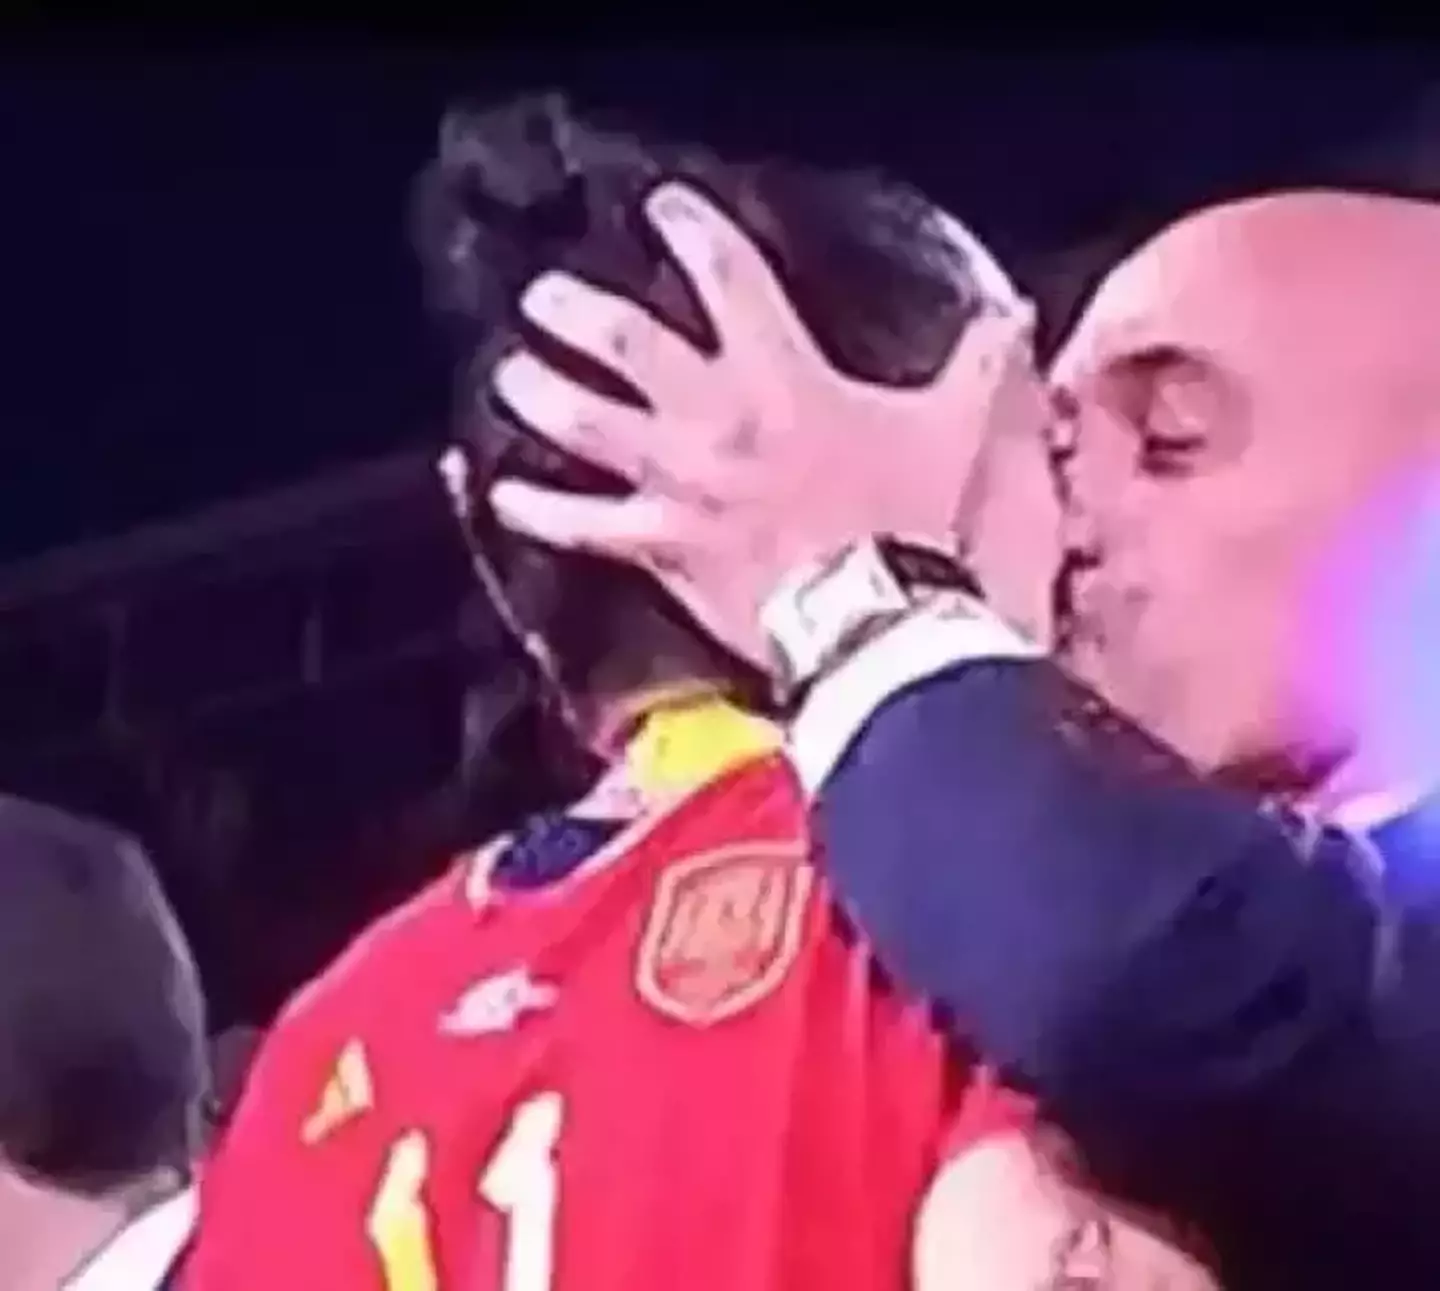 The football exec kissed Hermoso in a shocking moment during the Women's World Cup Final.